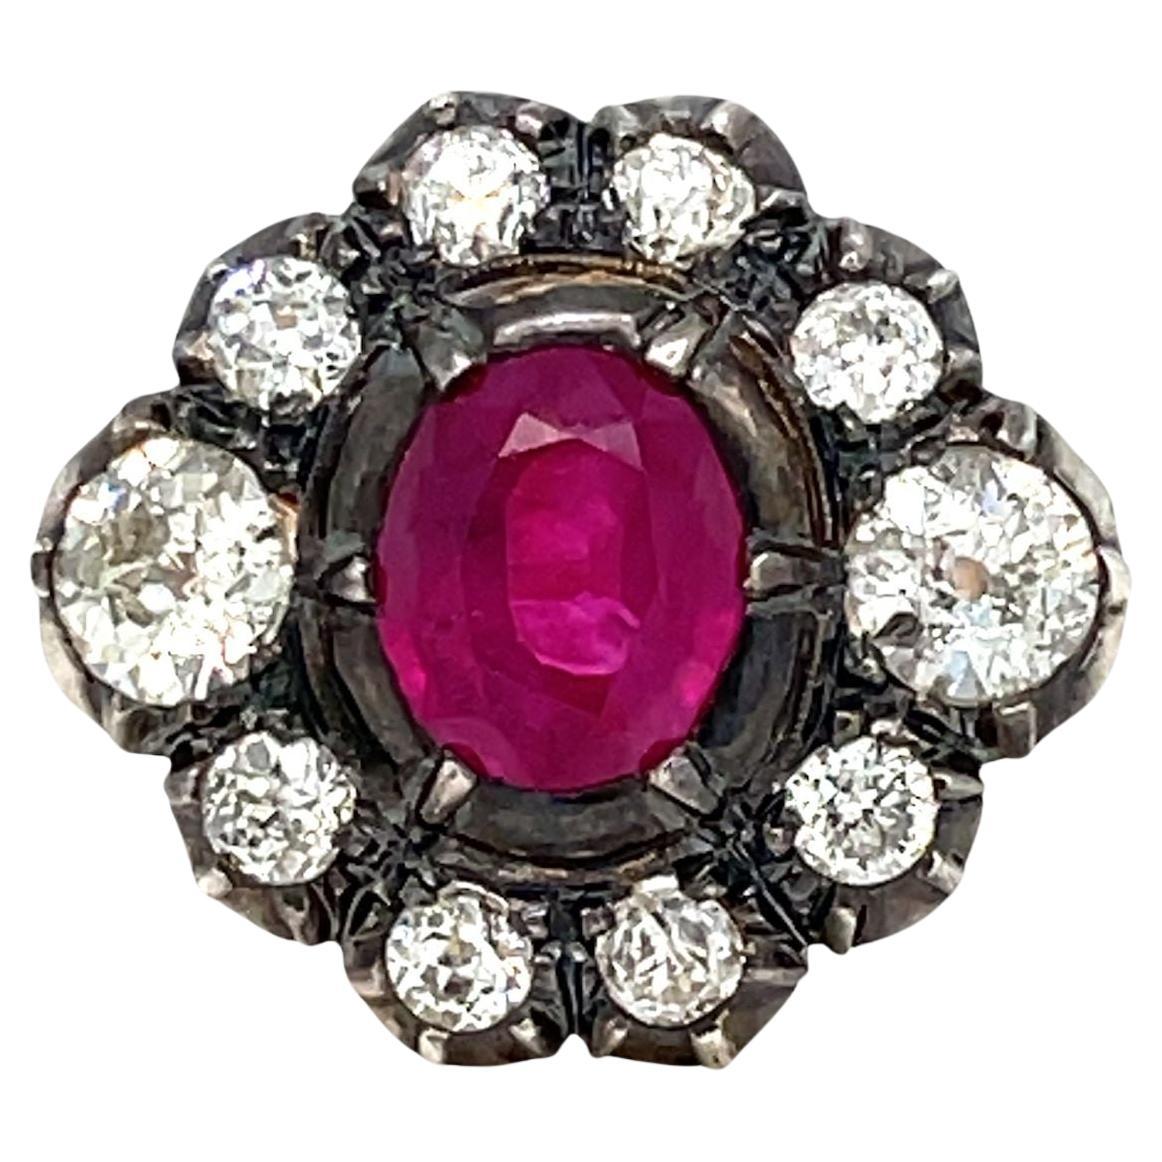 Late 19th century 2.05 Carat Ruby Diamond Gold Cluster Ring